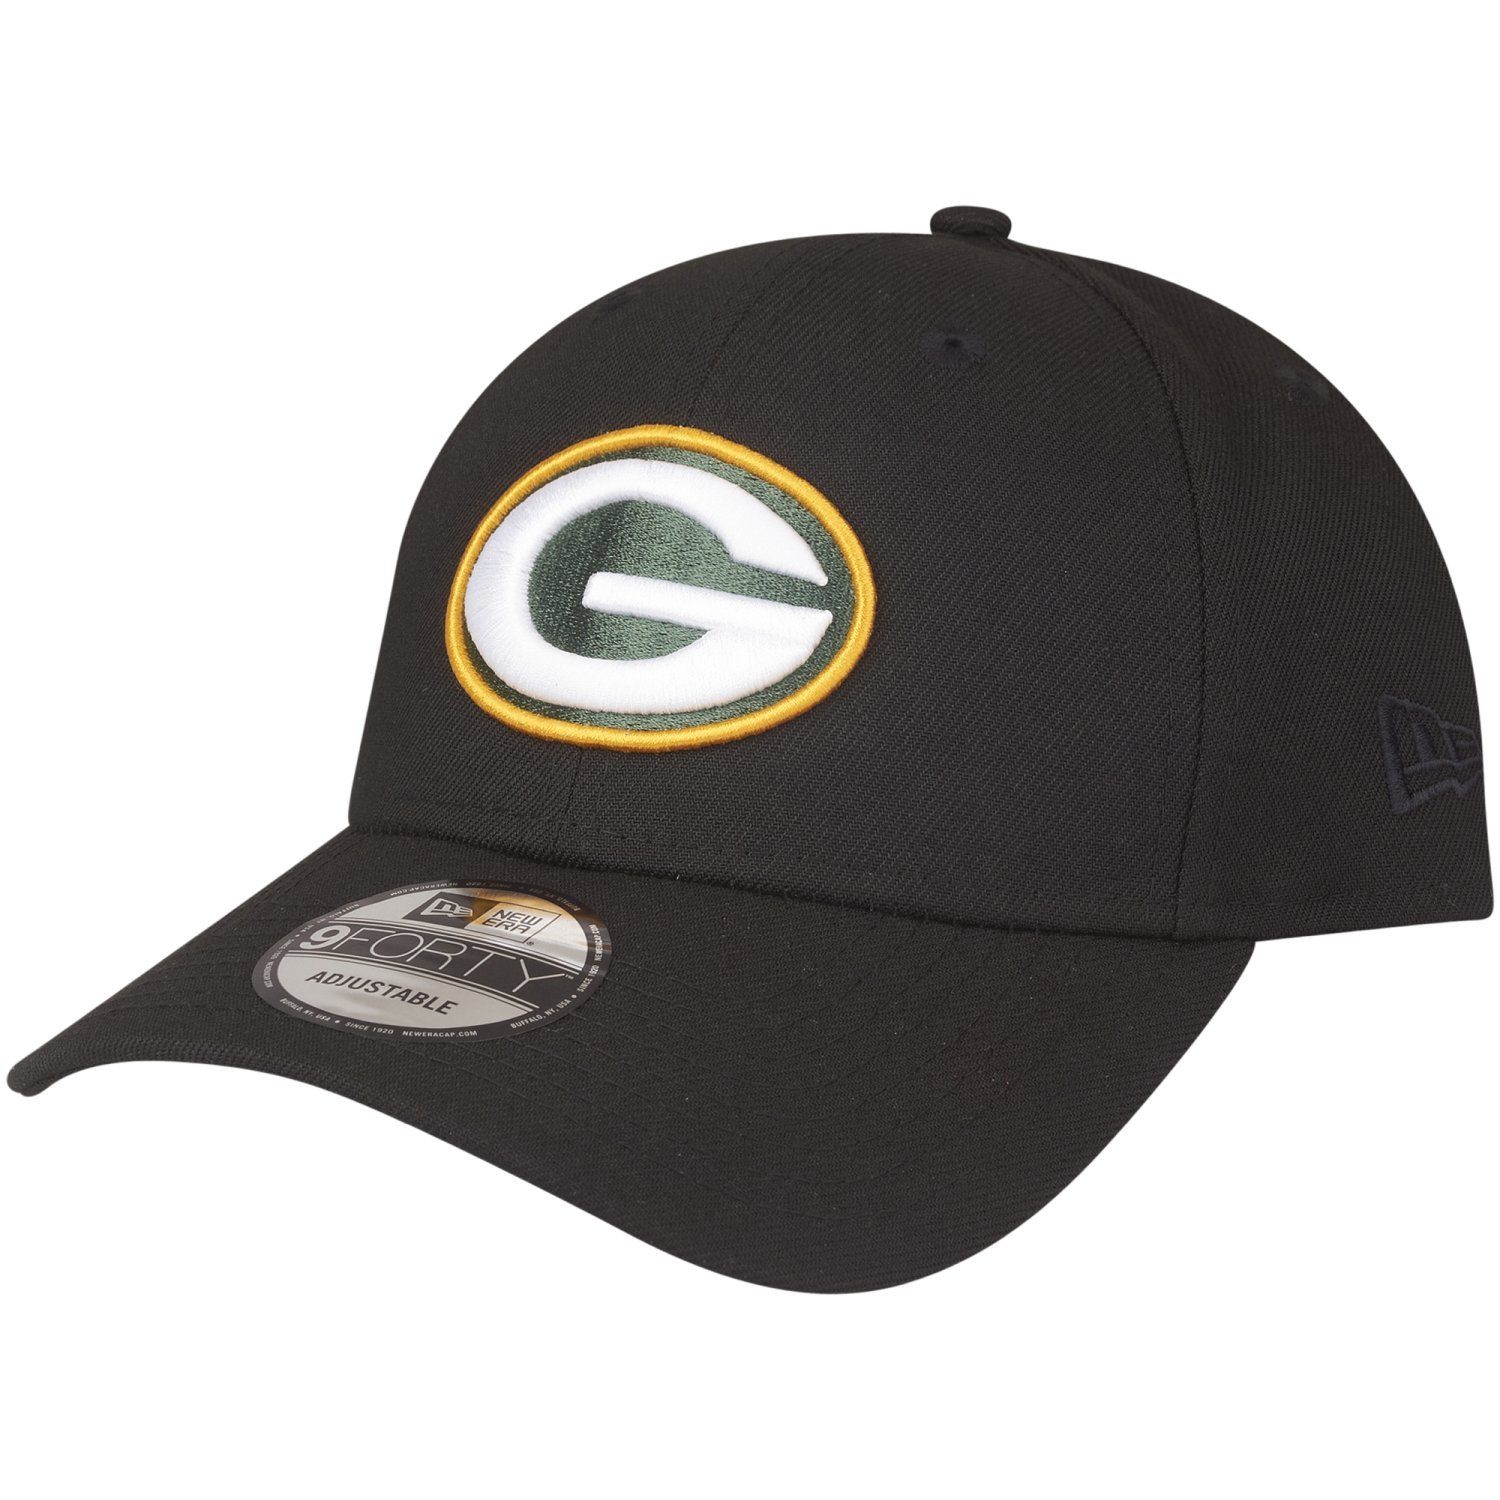 New Era Baseball Cap 9Forty Curved NFL Teams Green Bay Packers